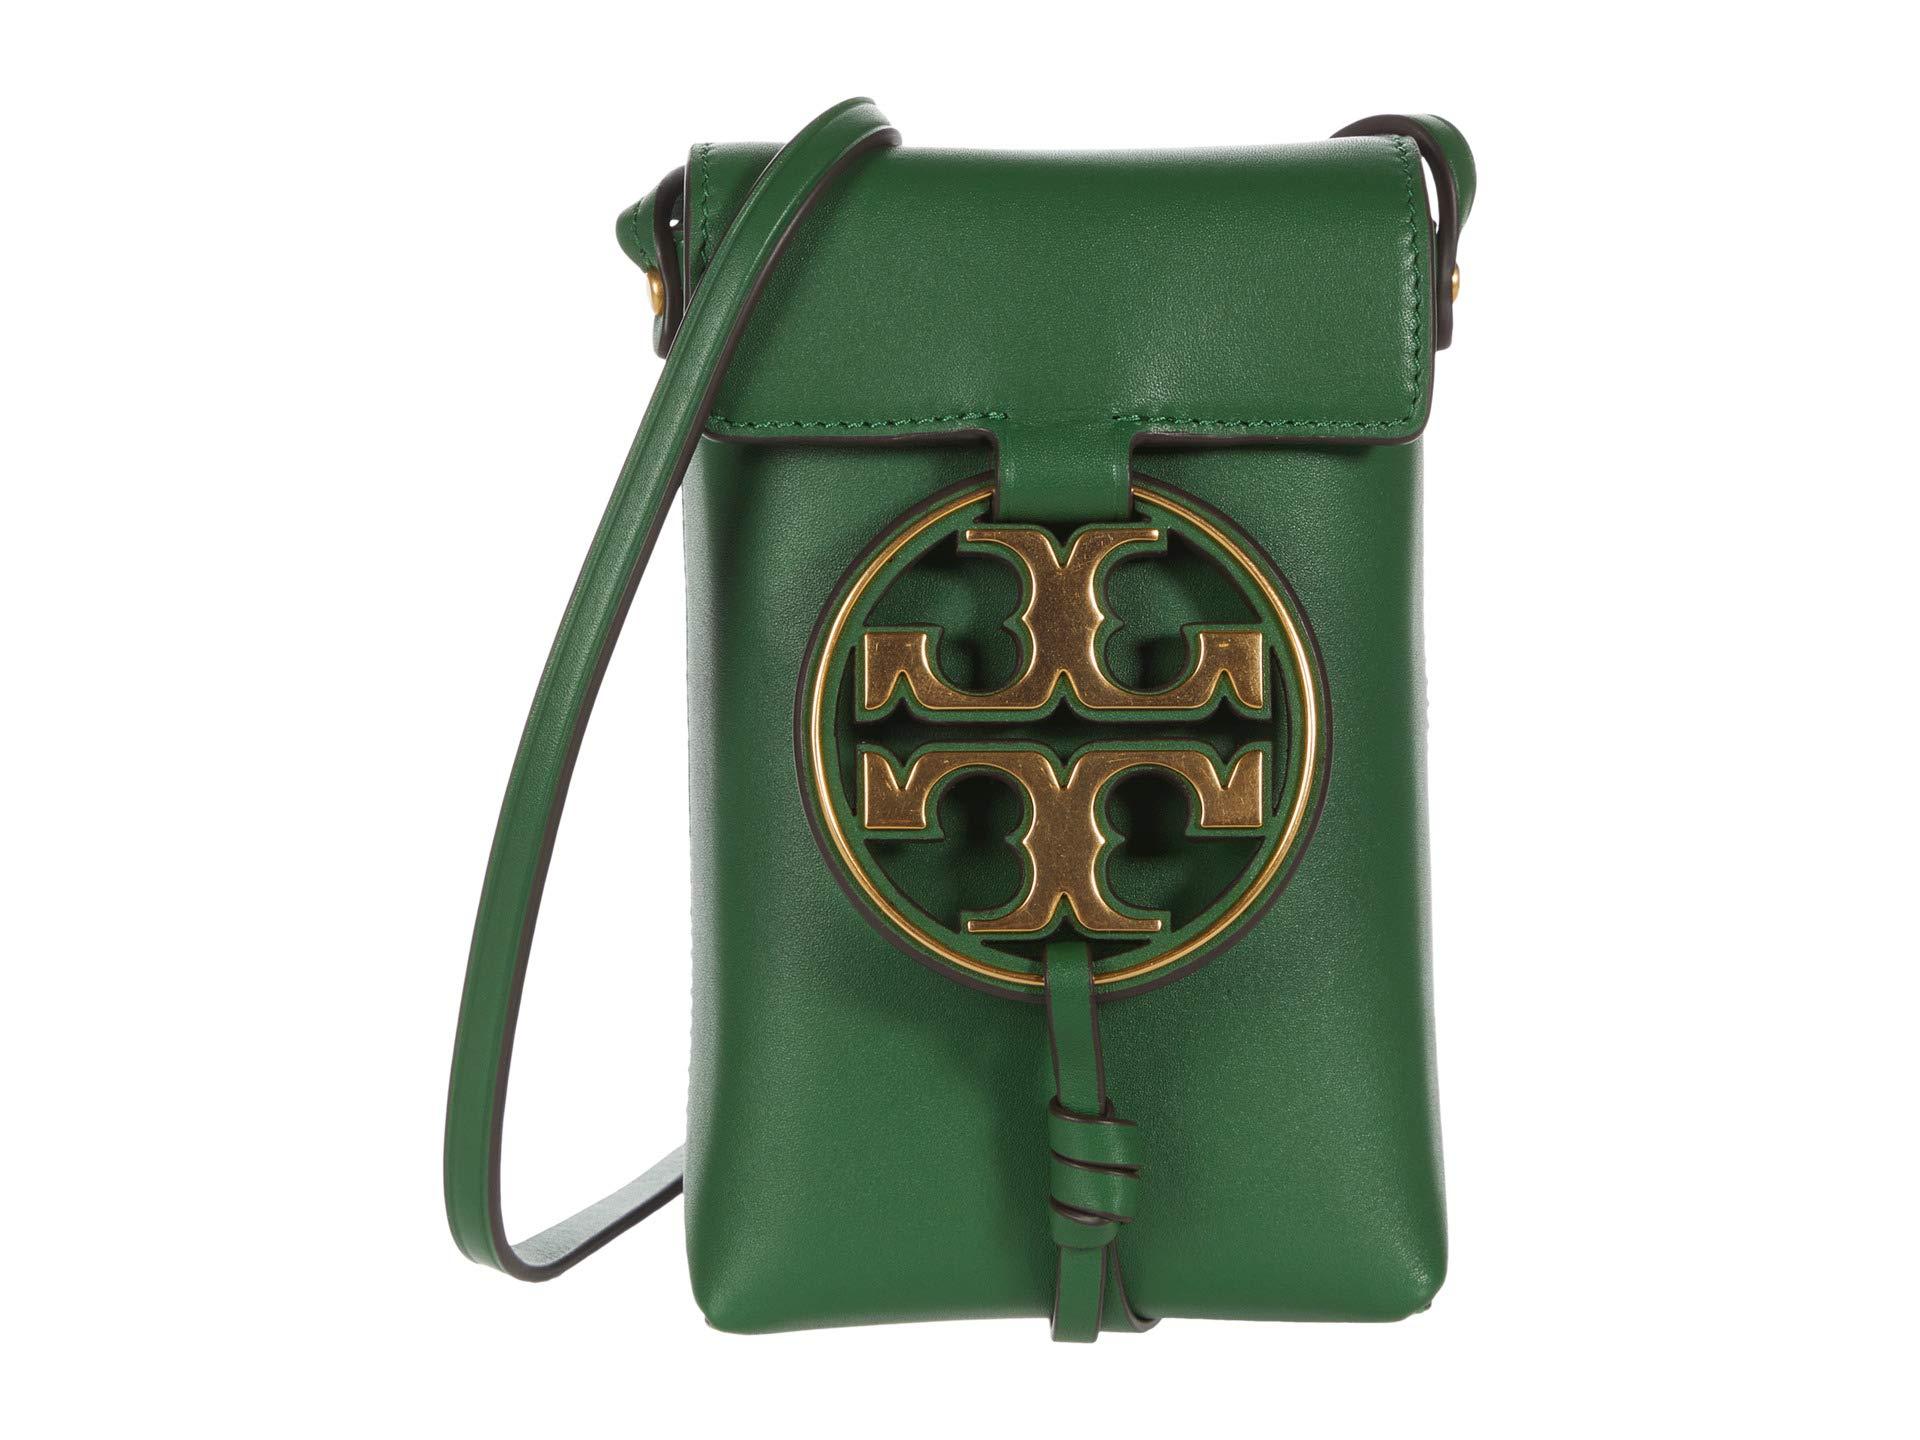 Tory Burch Leather Miller Metal Phone Crossbody in Green - Lyst